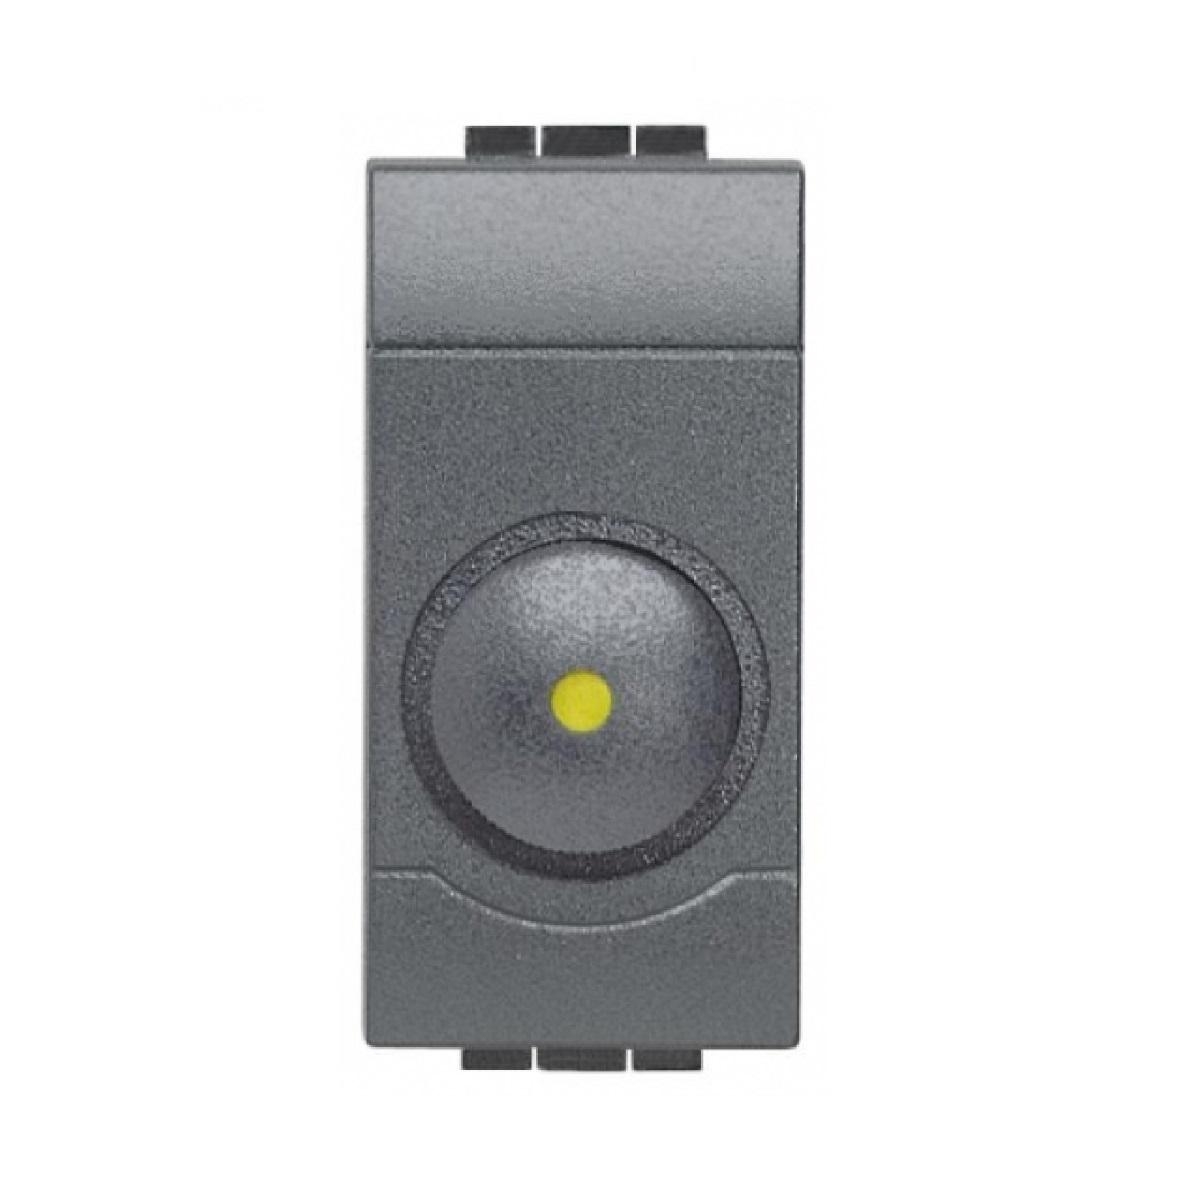 LIVING INT-DIMMER A MANOPOLA 1MD - BTICINO L4406 - BTICINO L4406 product photo